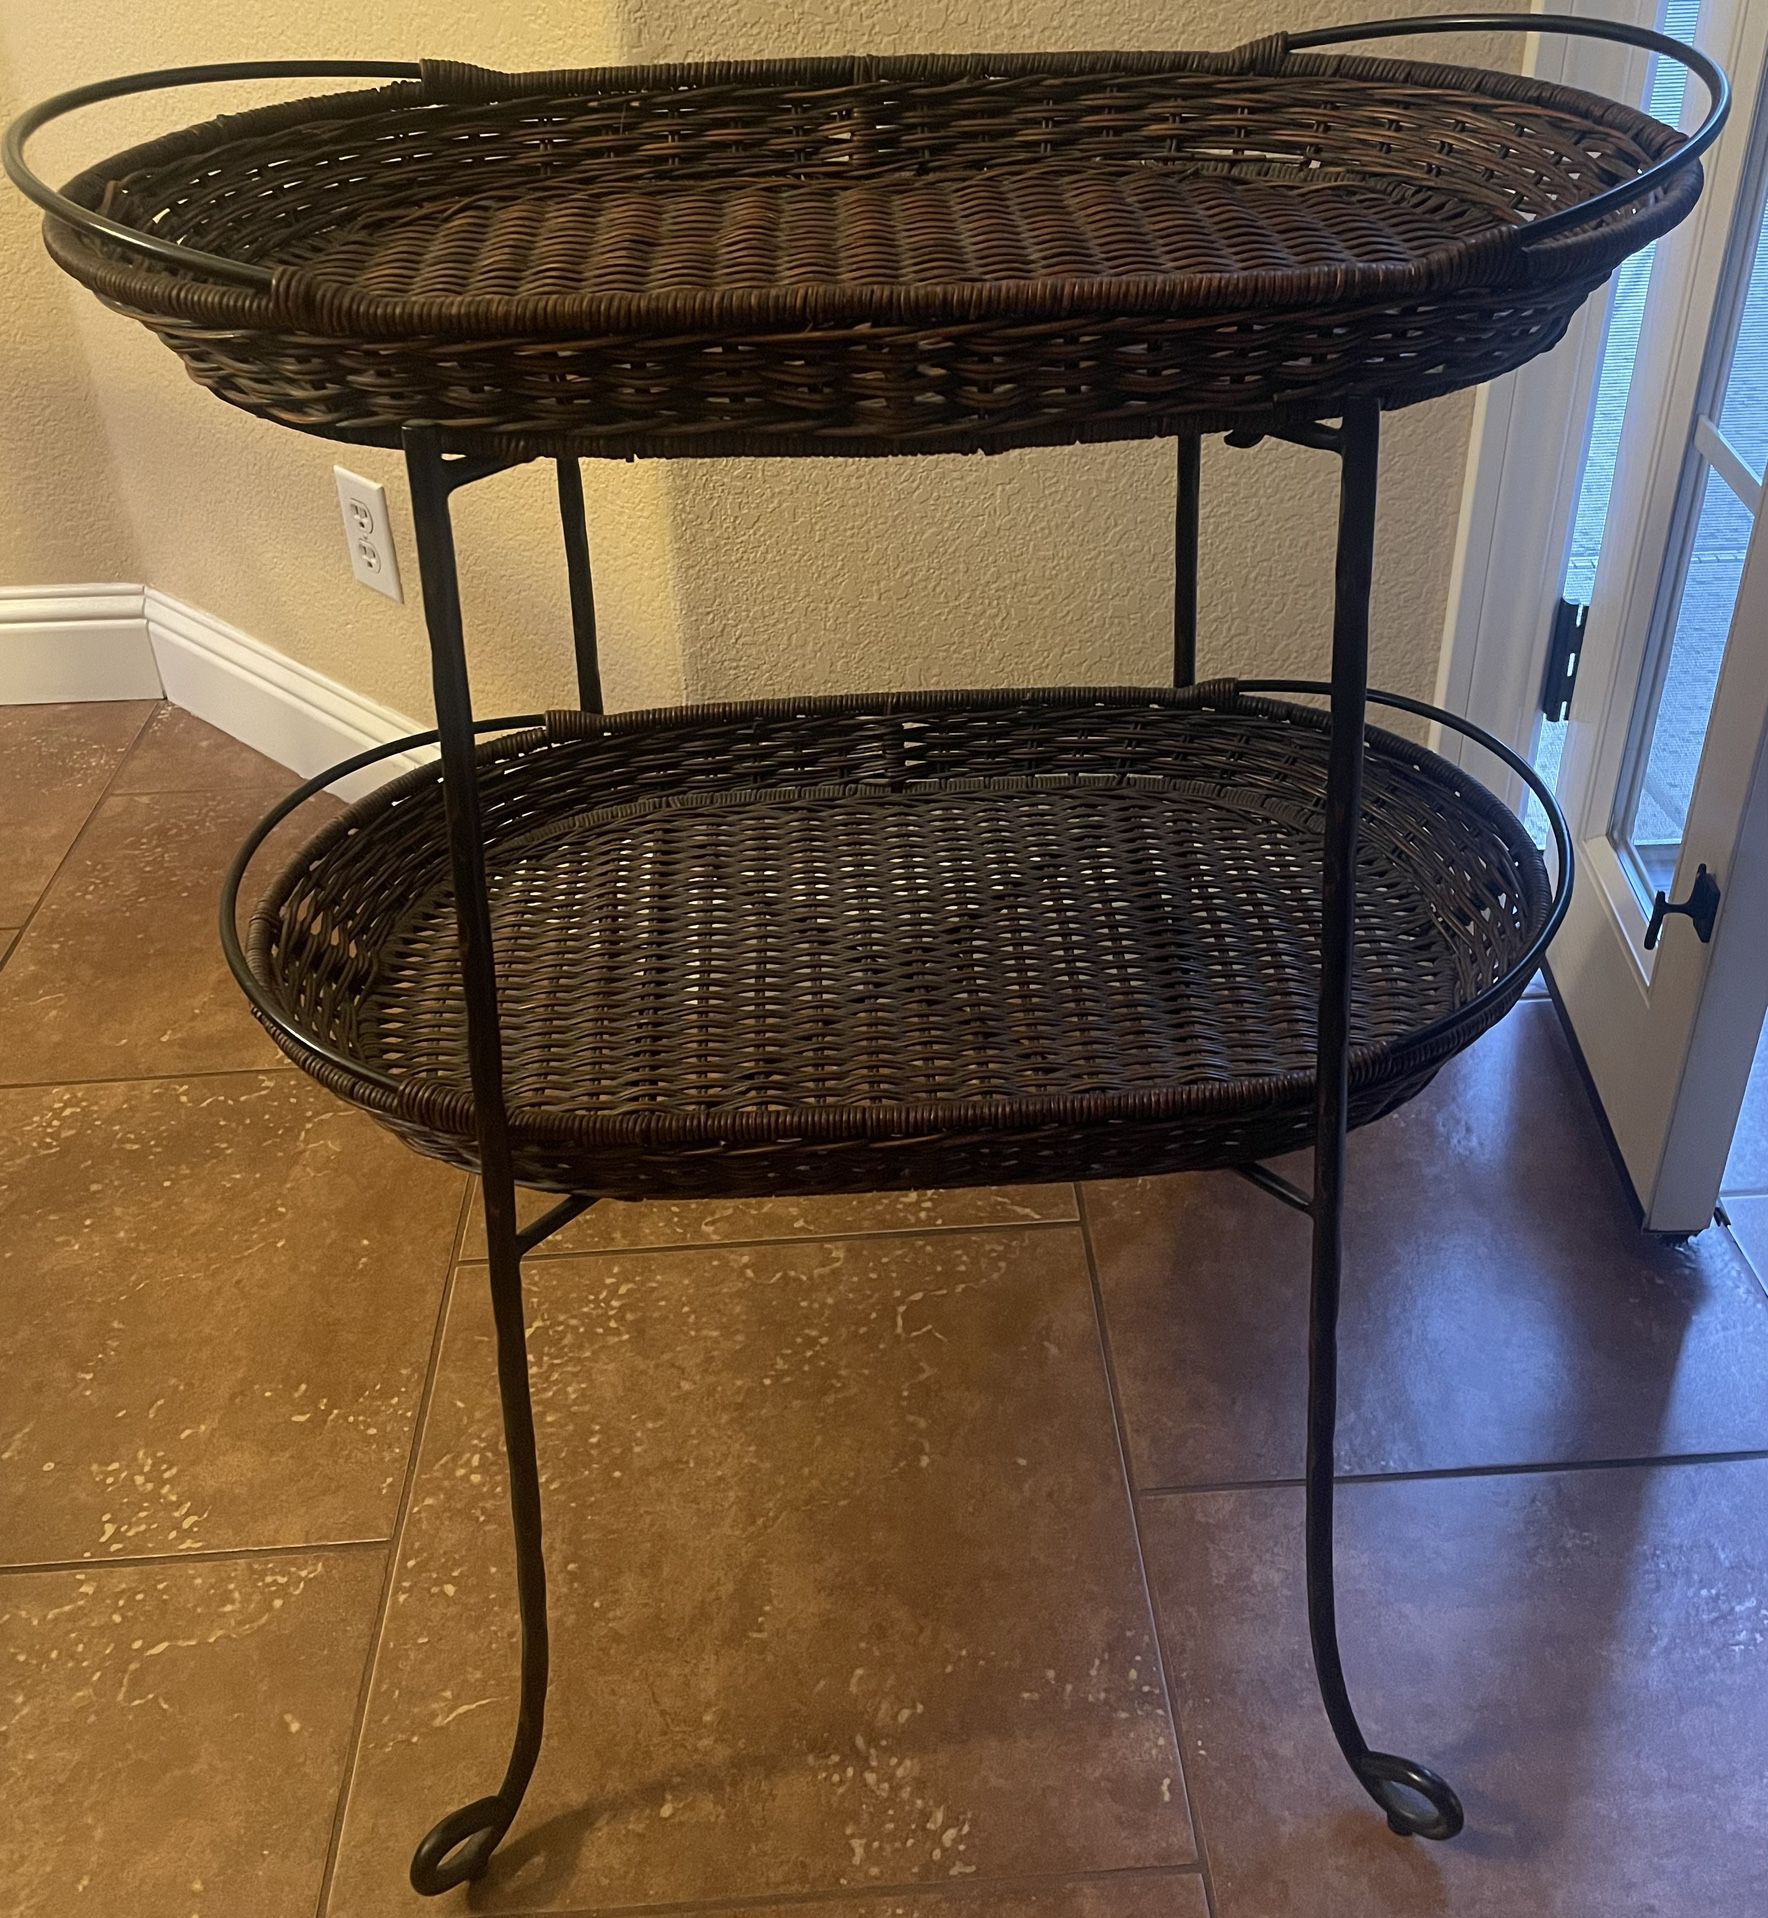 Two Tiered Basket Stand